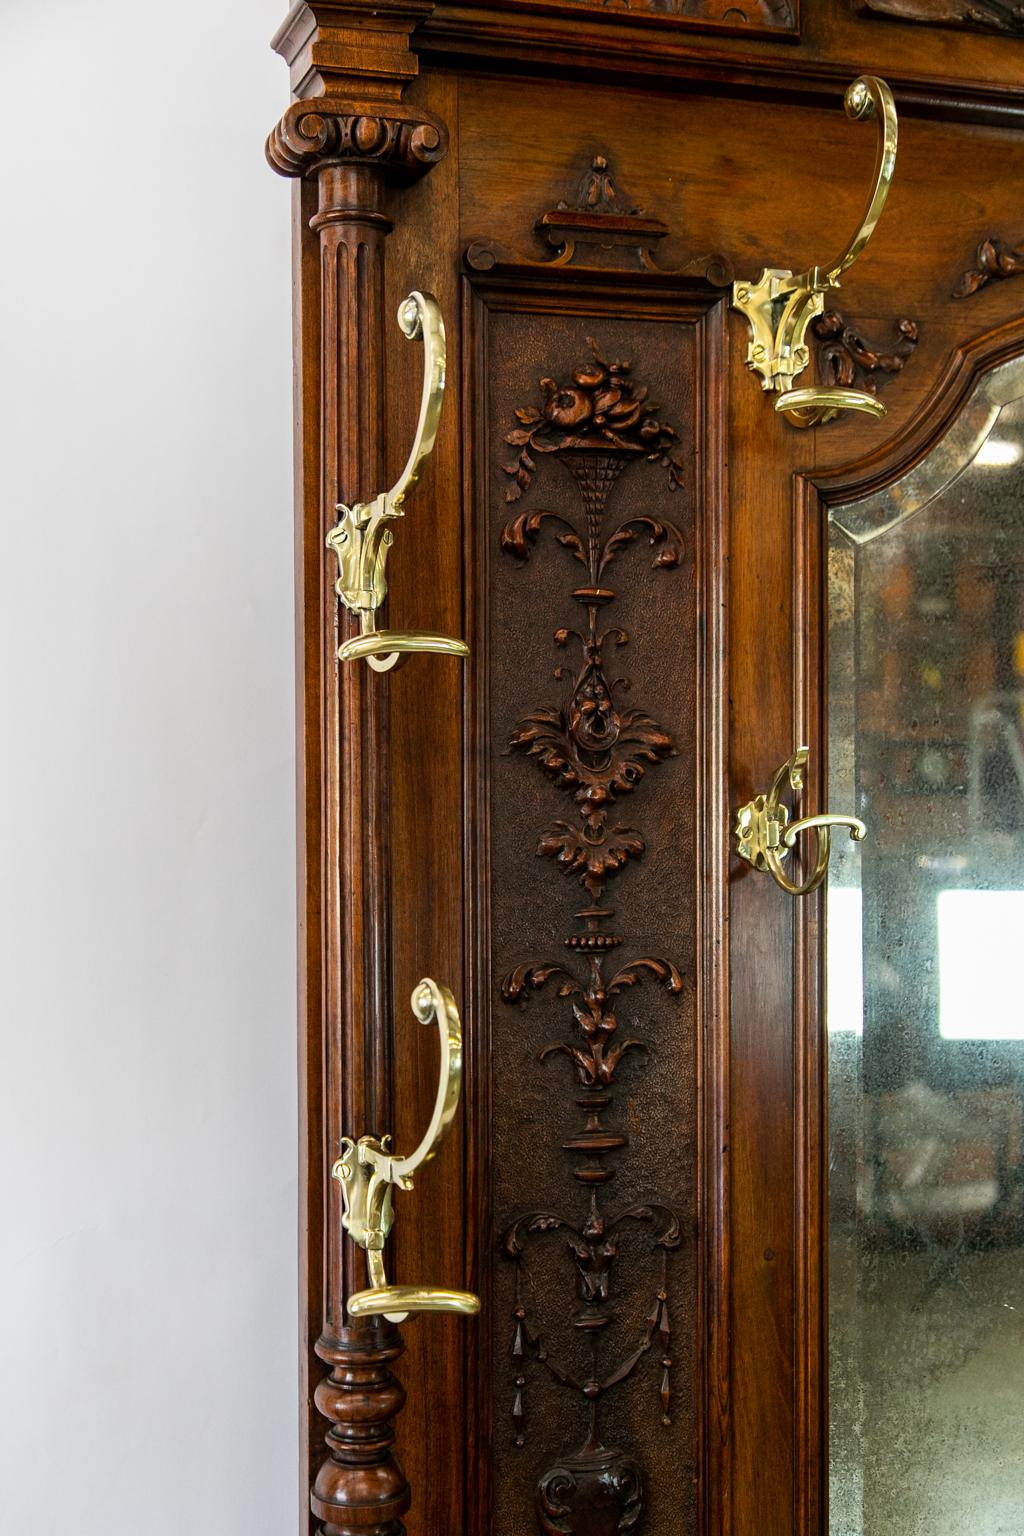 Large carved English solid walnut hall stand has all of the original hardware which is heavy cast brass and has been polished and lacquered for easy maintenance. The top half is profusely carved with intricate urns, arabesques, and baskets of grapes